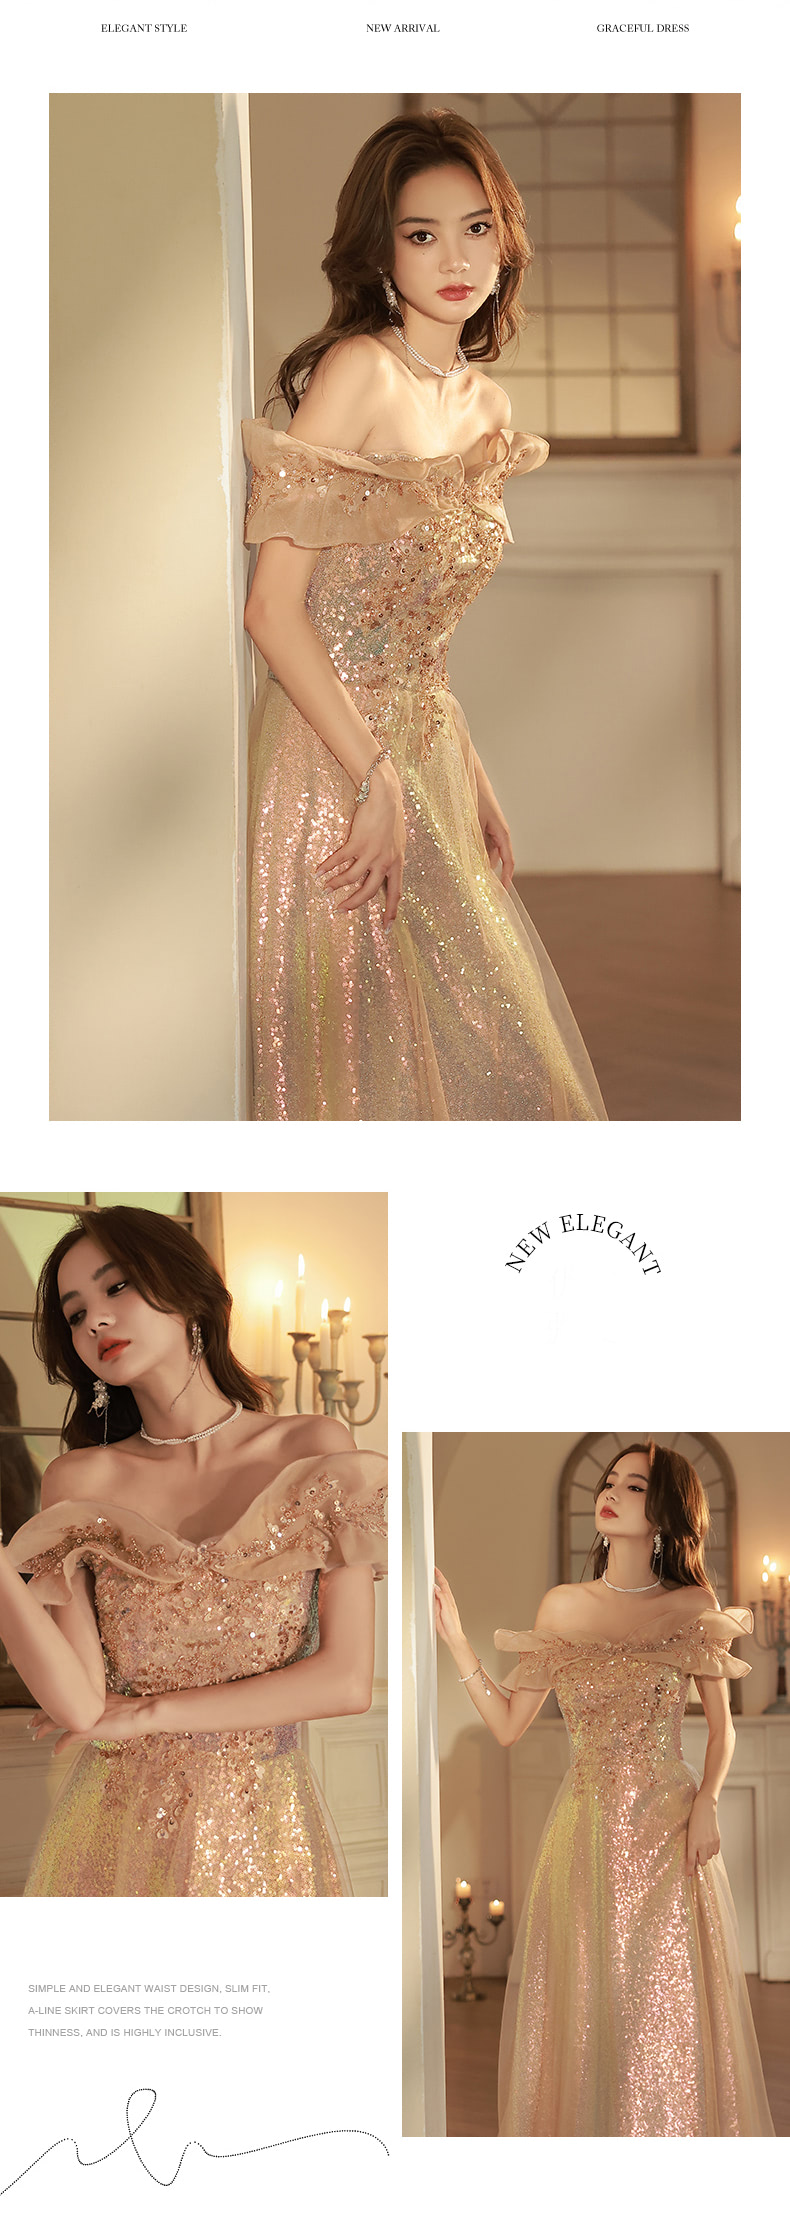 Luxury-Off-Shoulder-Sequin-Glitter-Sparkly-Long-Evening-Party-Dress11.jpg